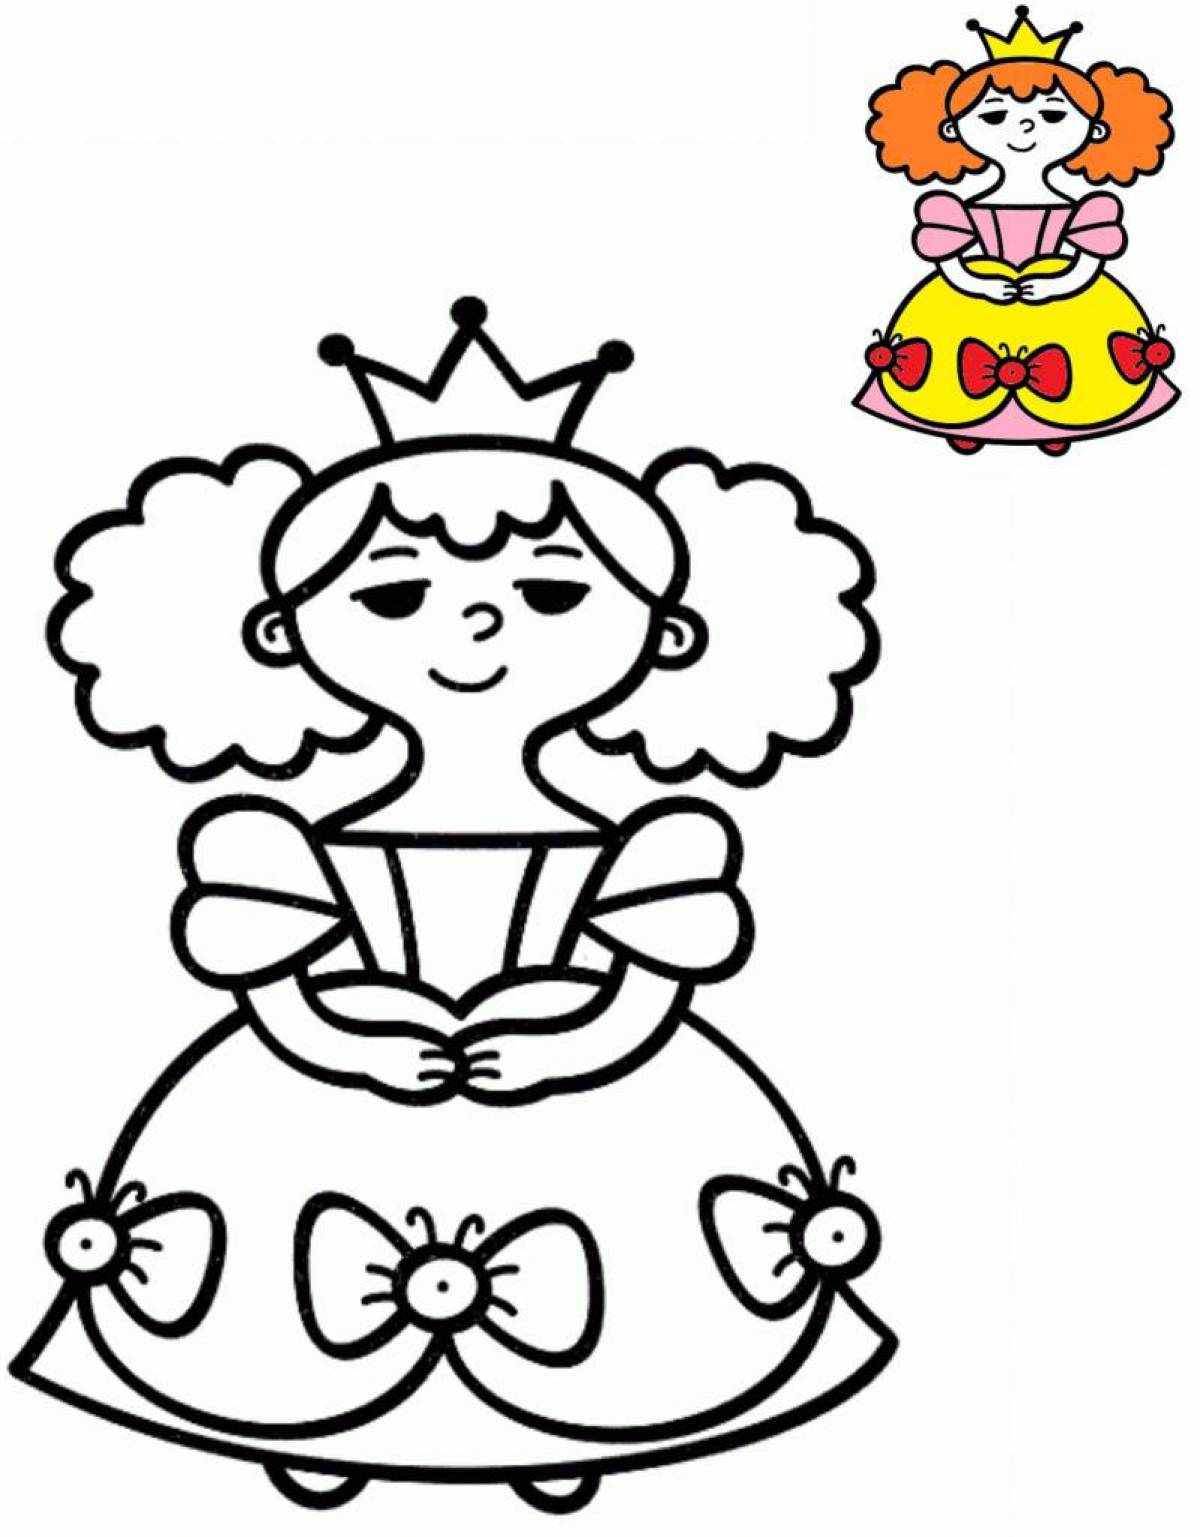 Exciting princess coloring book for kids 3-4 years old